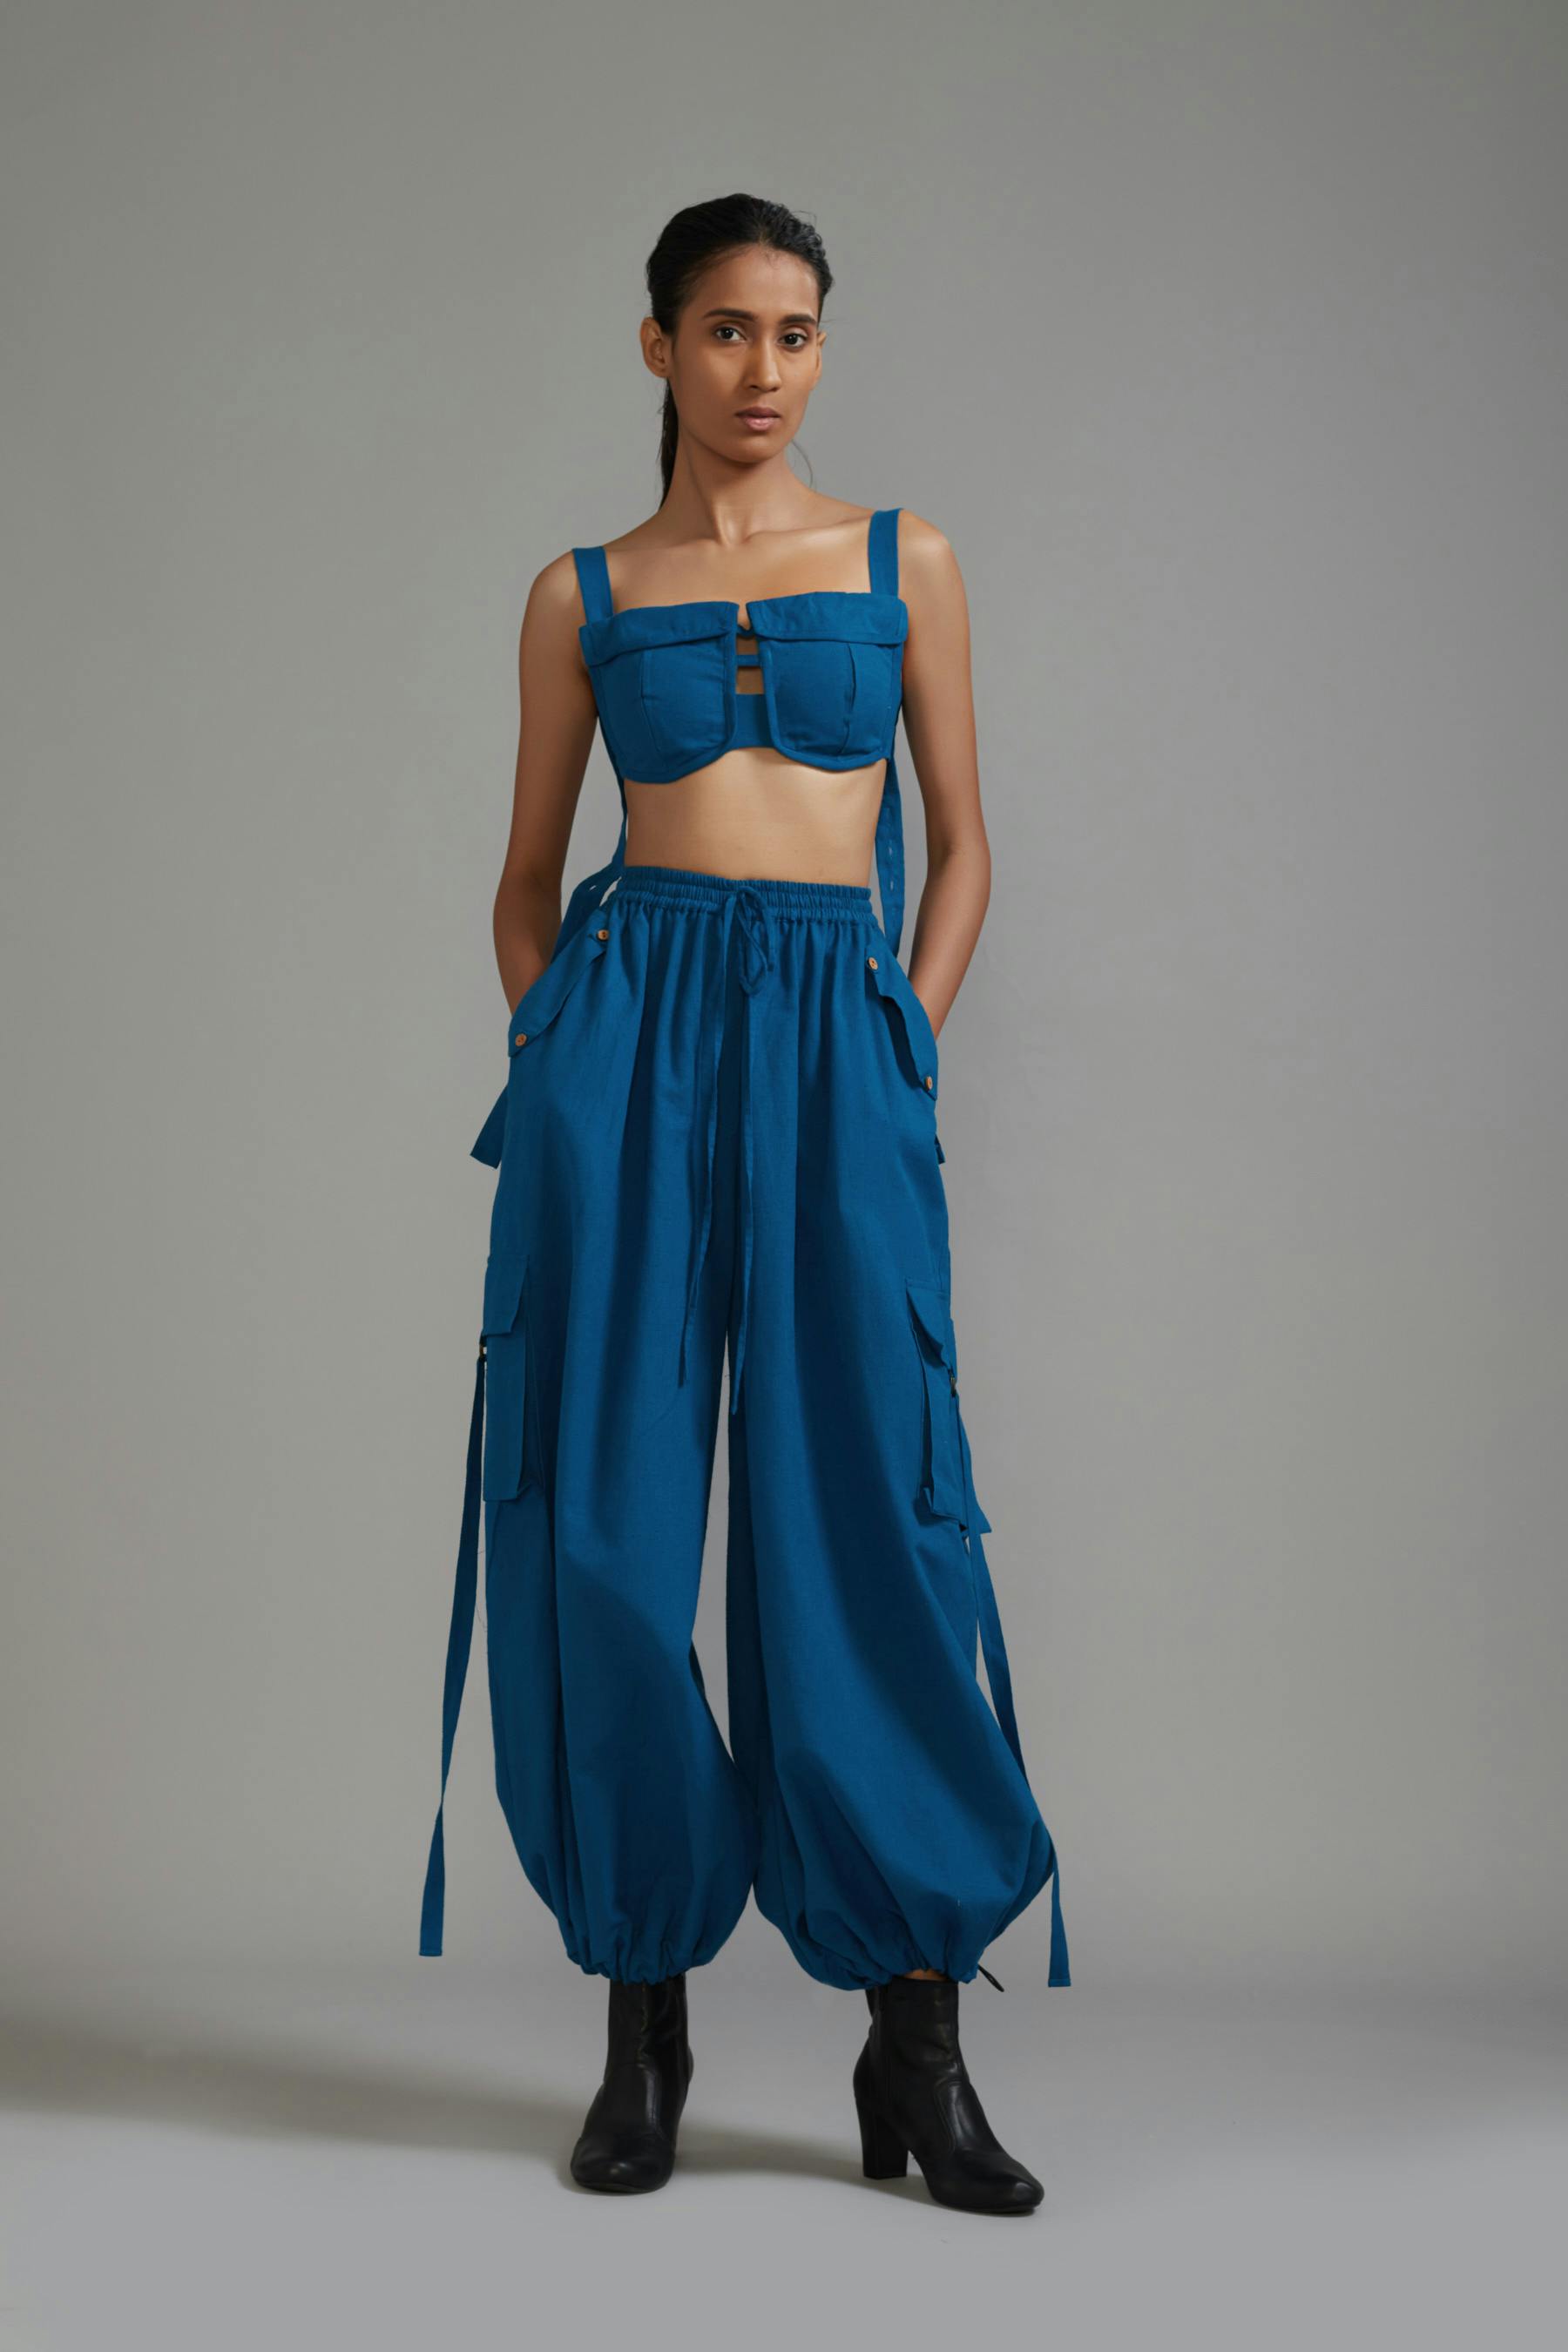 Blue Cargo Pants BRA, a product by Style Mati